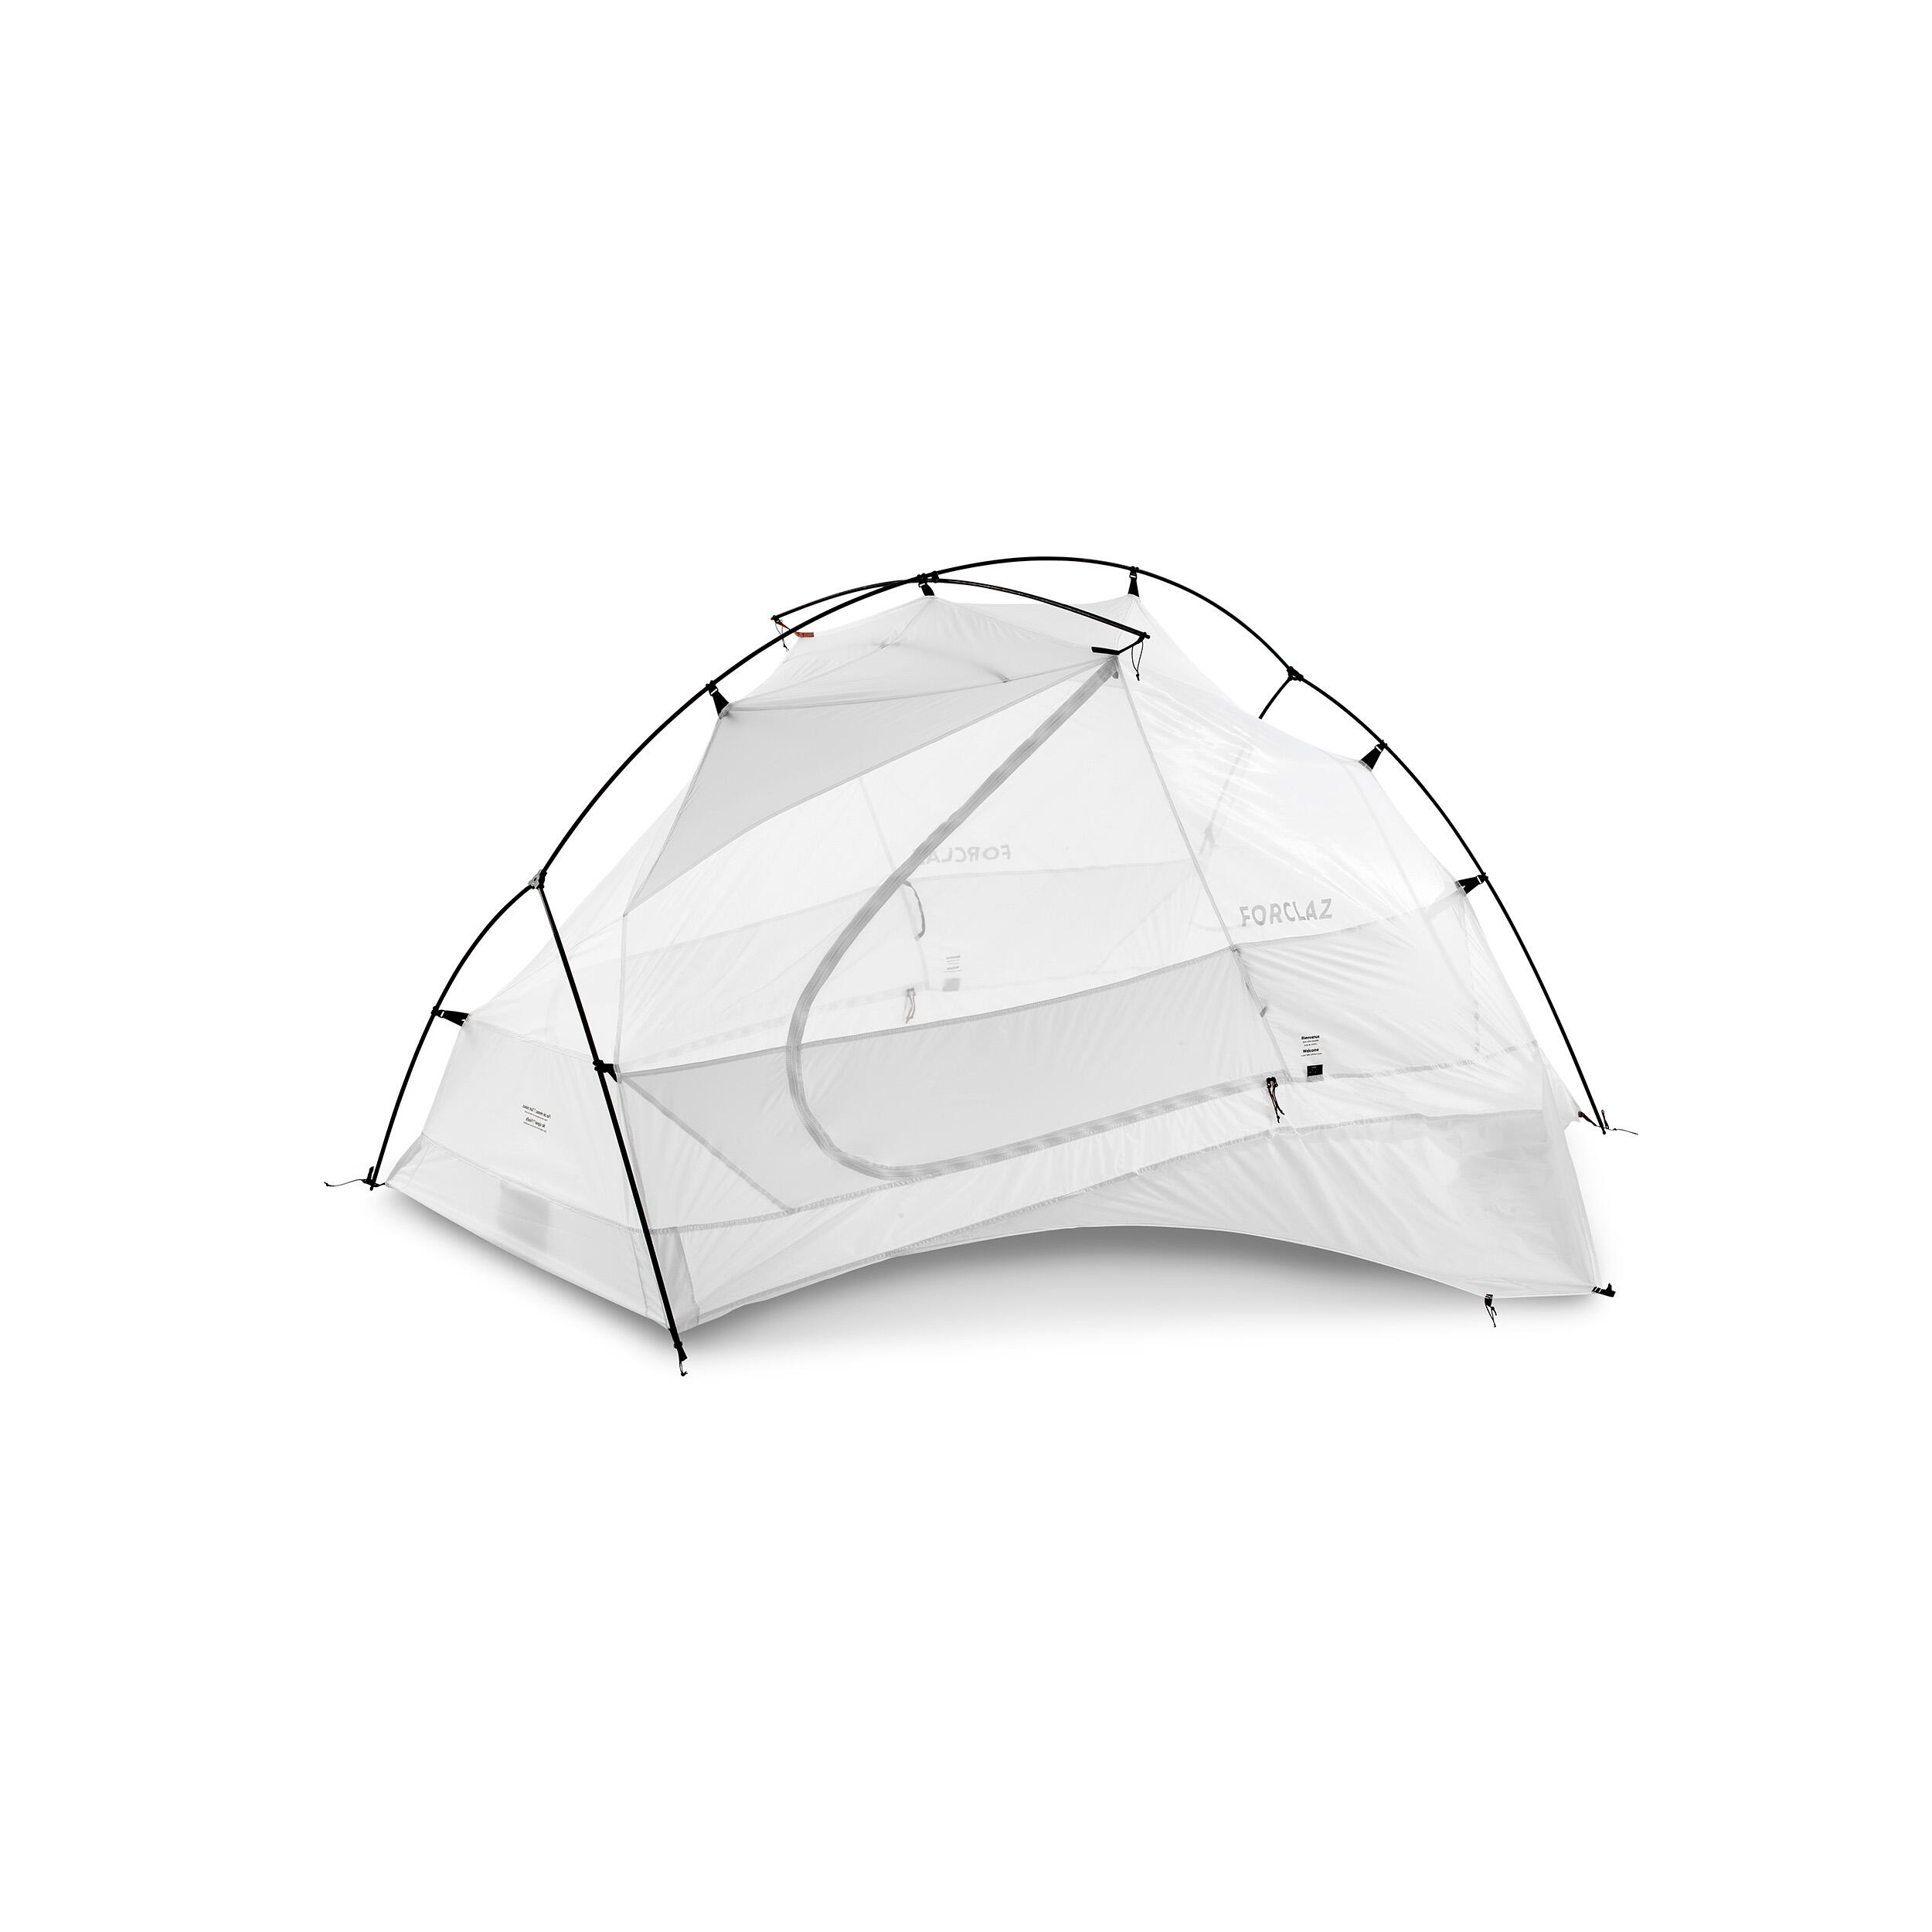 Trekking dome tent - 2-person - MT900 Minimal Editions 7/11